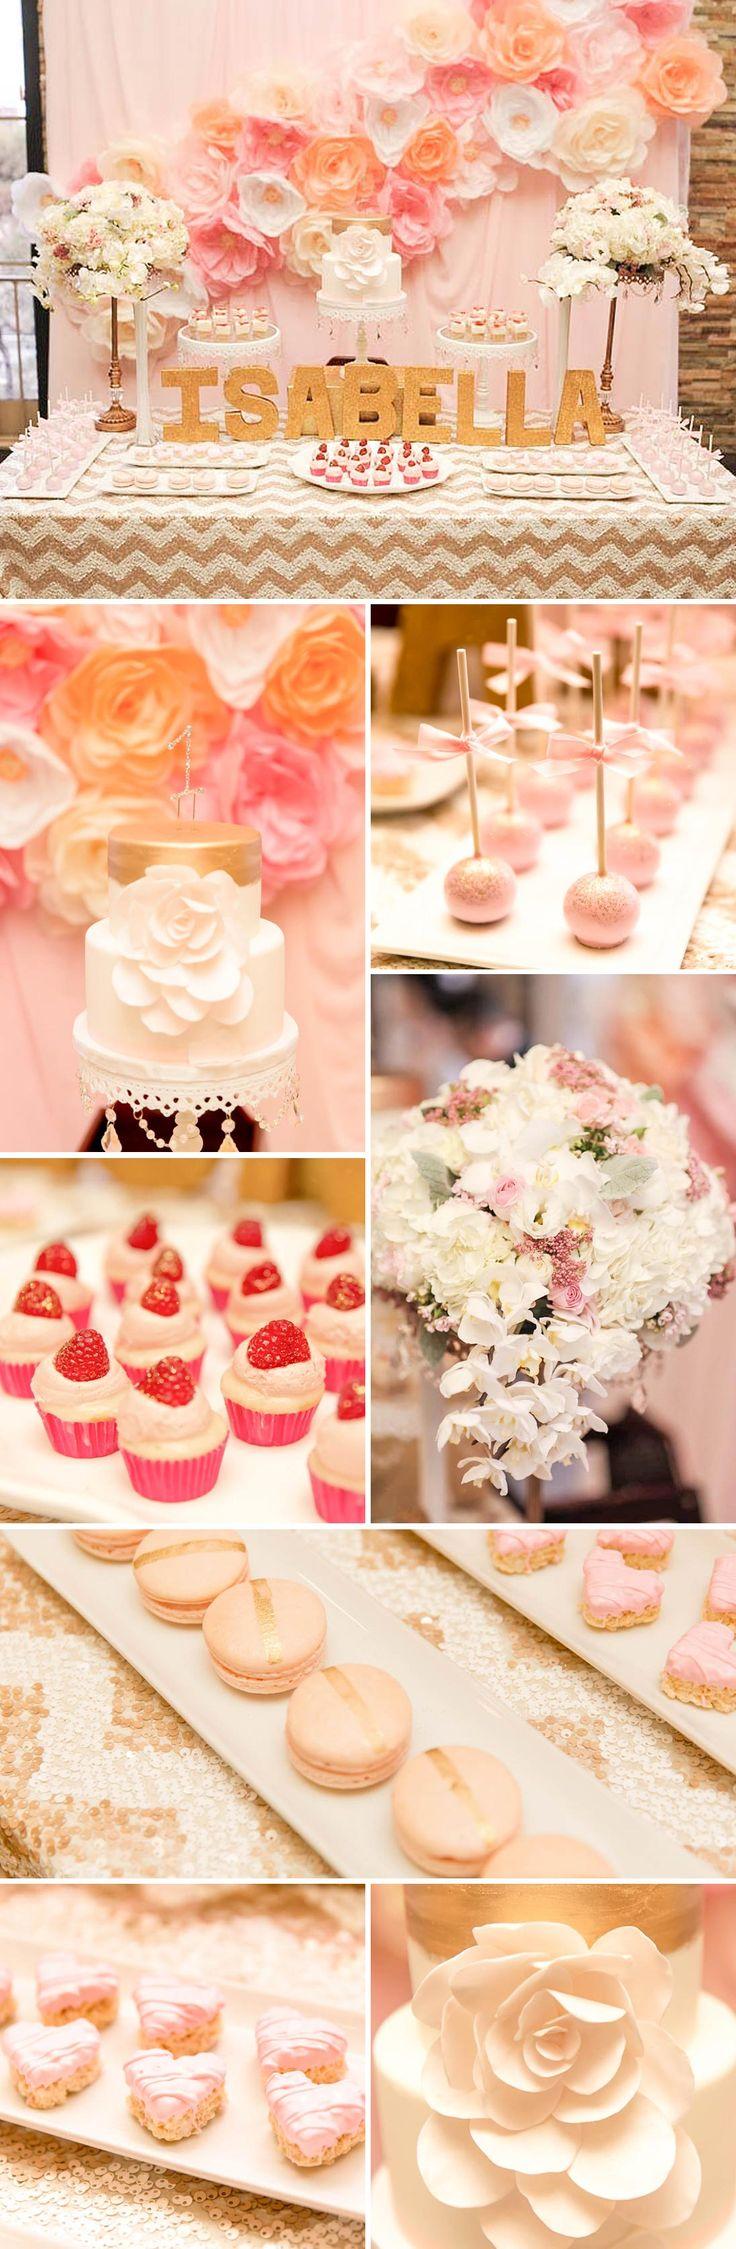 Wedding - A Glam Gold And Pink First Birthday Party - On To Baby